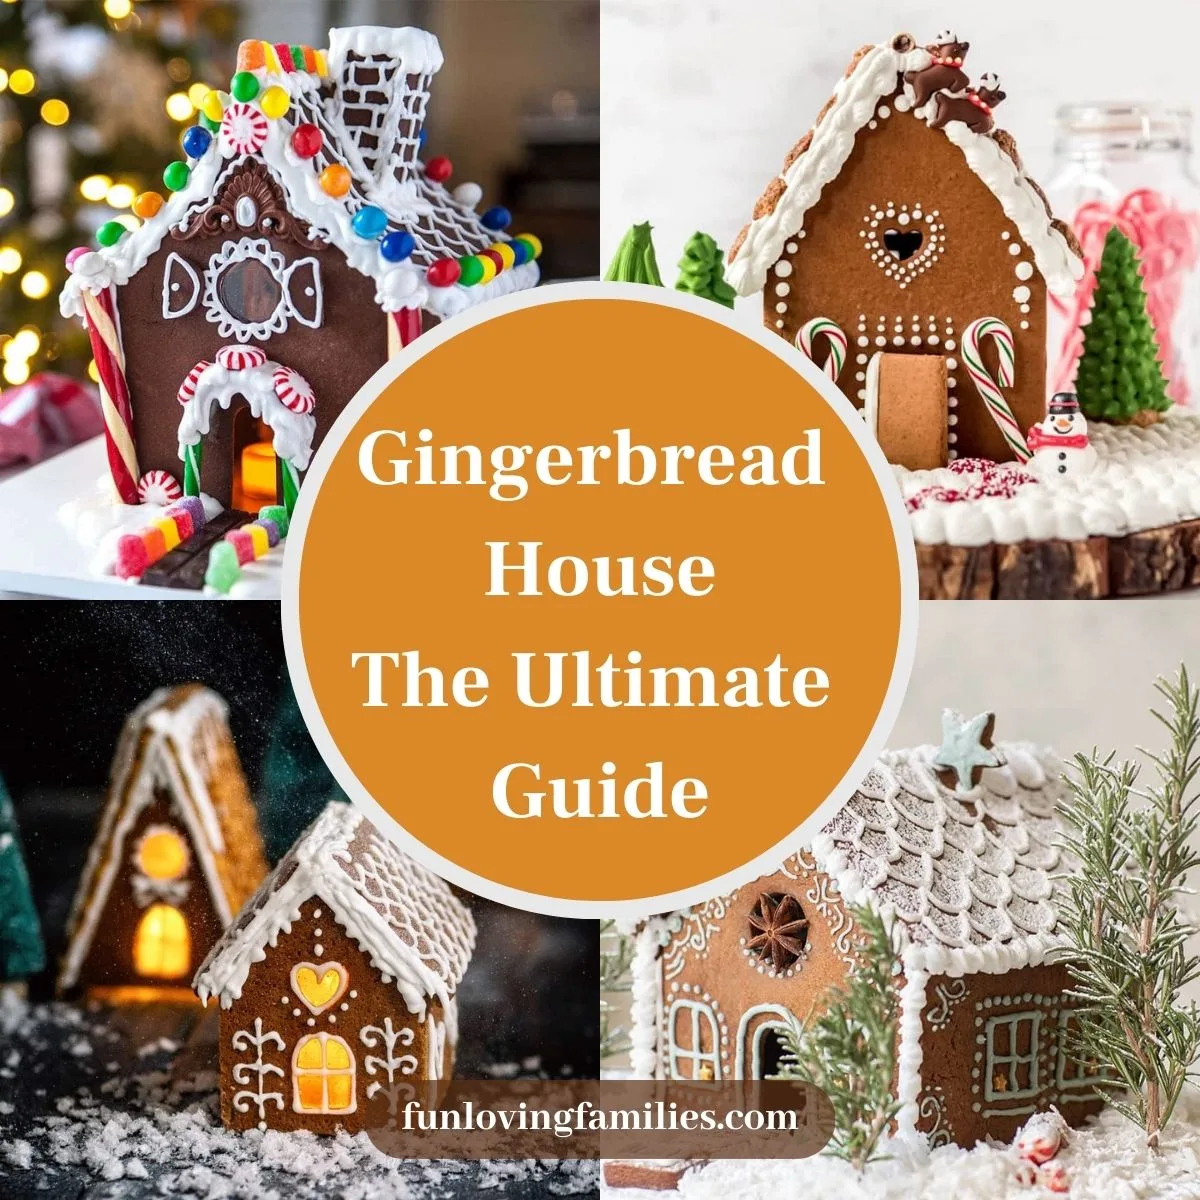 25 Gingerbread House Ideas, Tips and Tricks